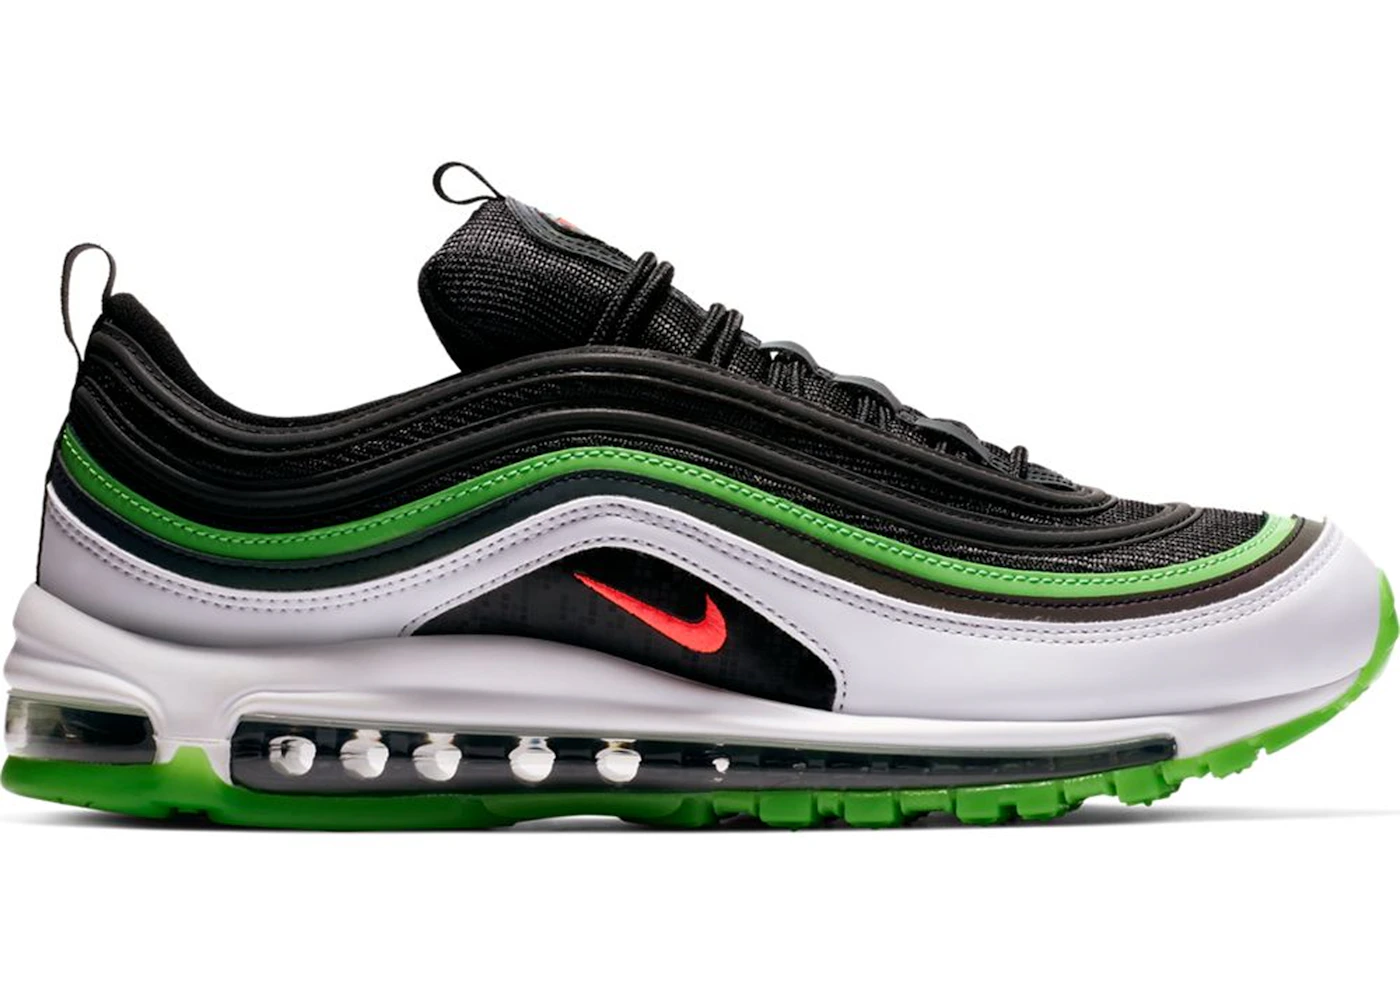 Recollection Pacific fordampning Nike Air Max 97 Dallas Home - CD7788-001 - US